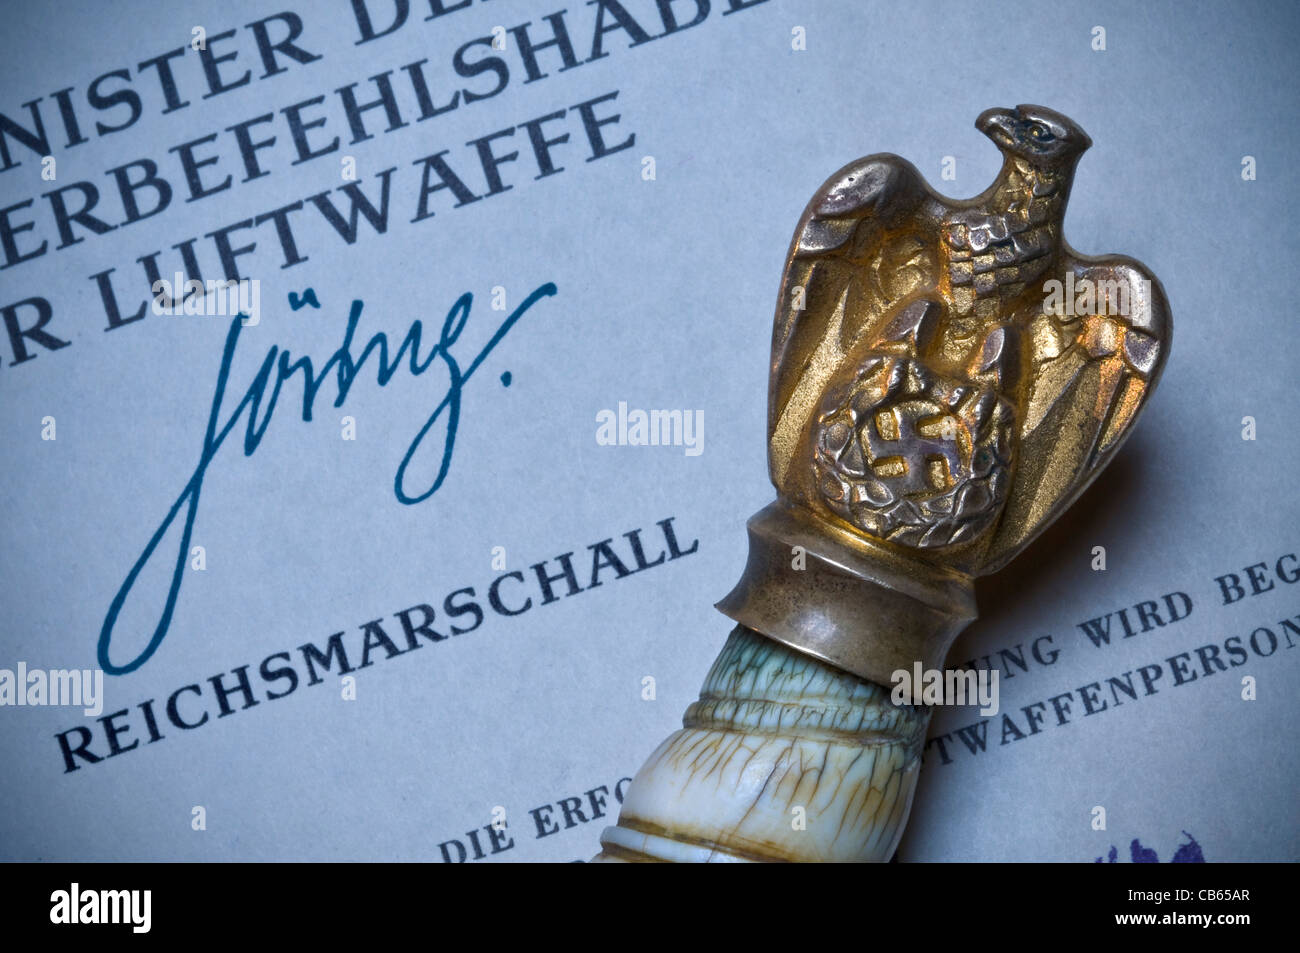 Ceremonial military baton crested with gold eagle and Nazi Swastika on original signed WW2 document from Reichsmarschall Goering Stock Photo